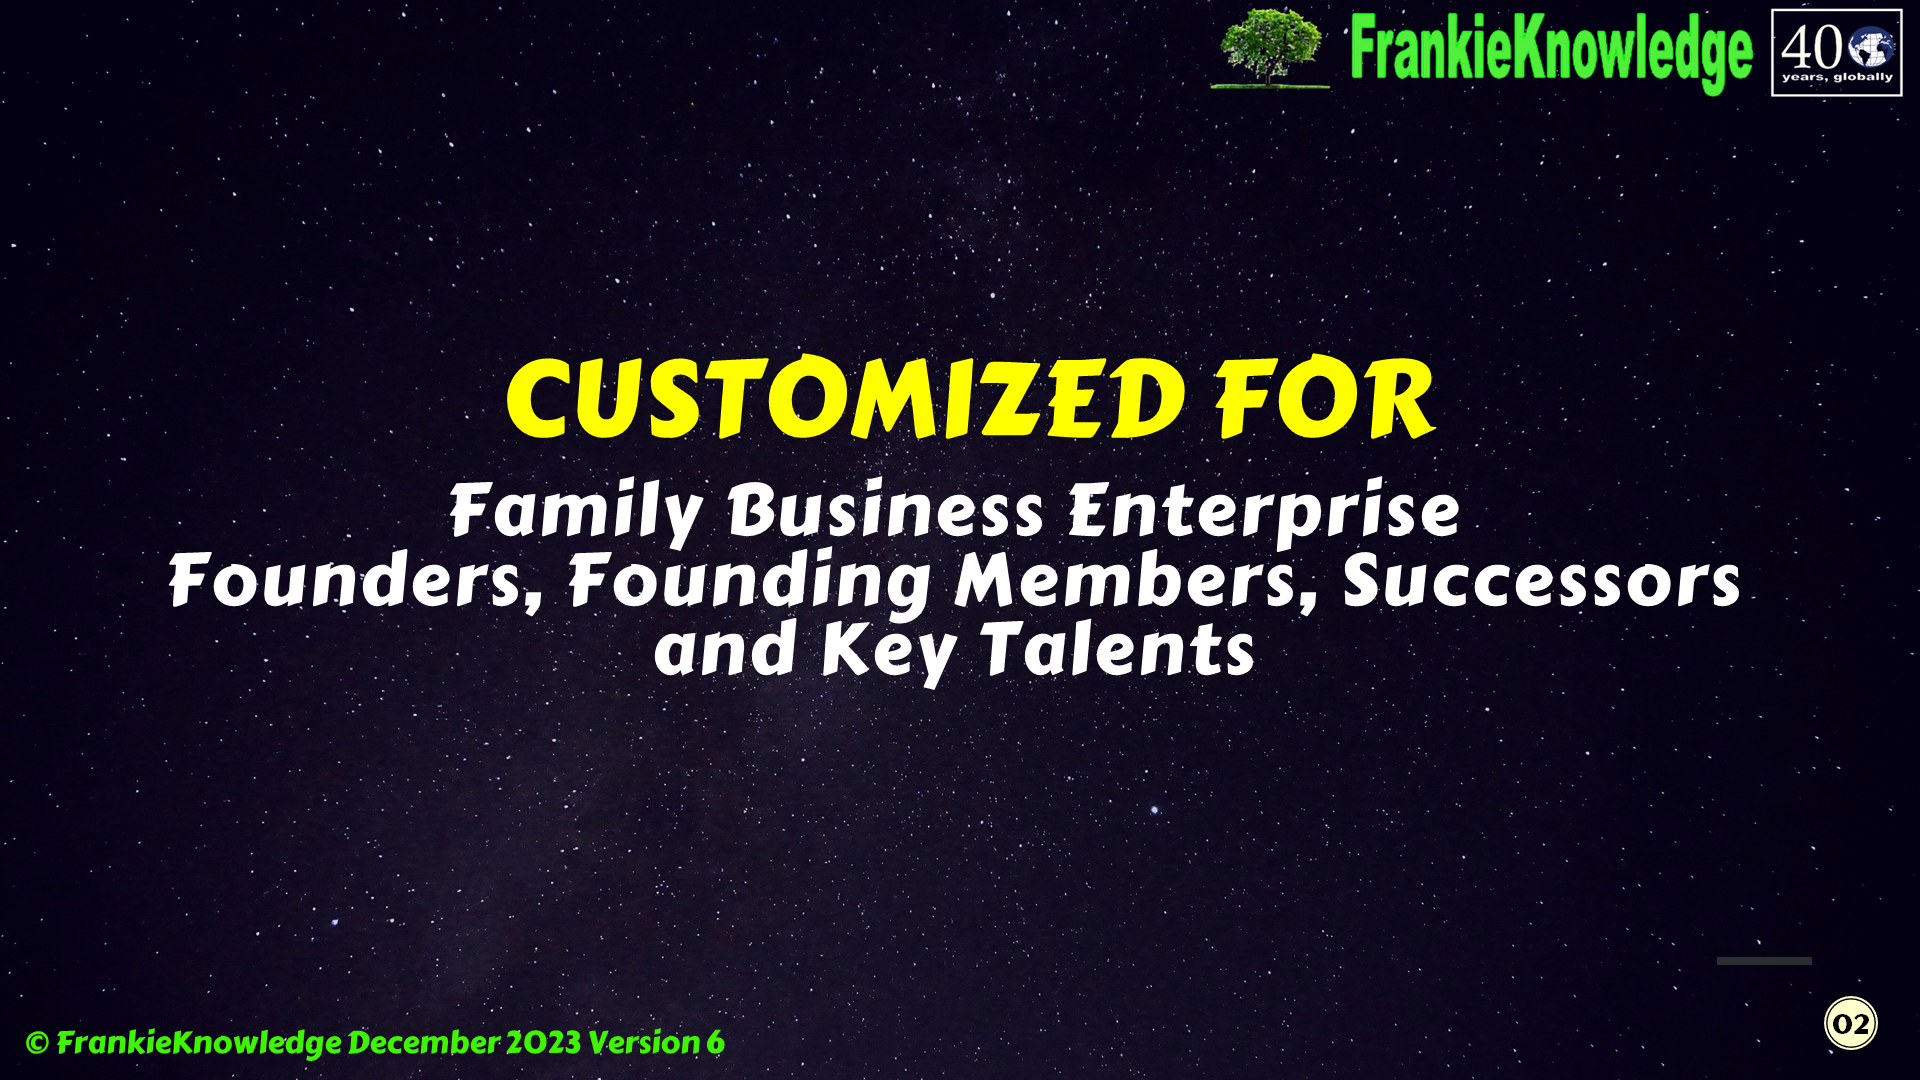 2. Project Outline - The Family Business Enterprise Legacy Master Planning Outline by FrankieKnowledge